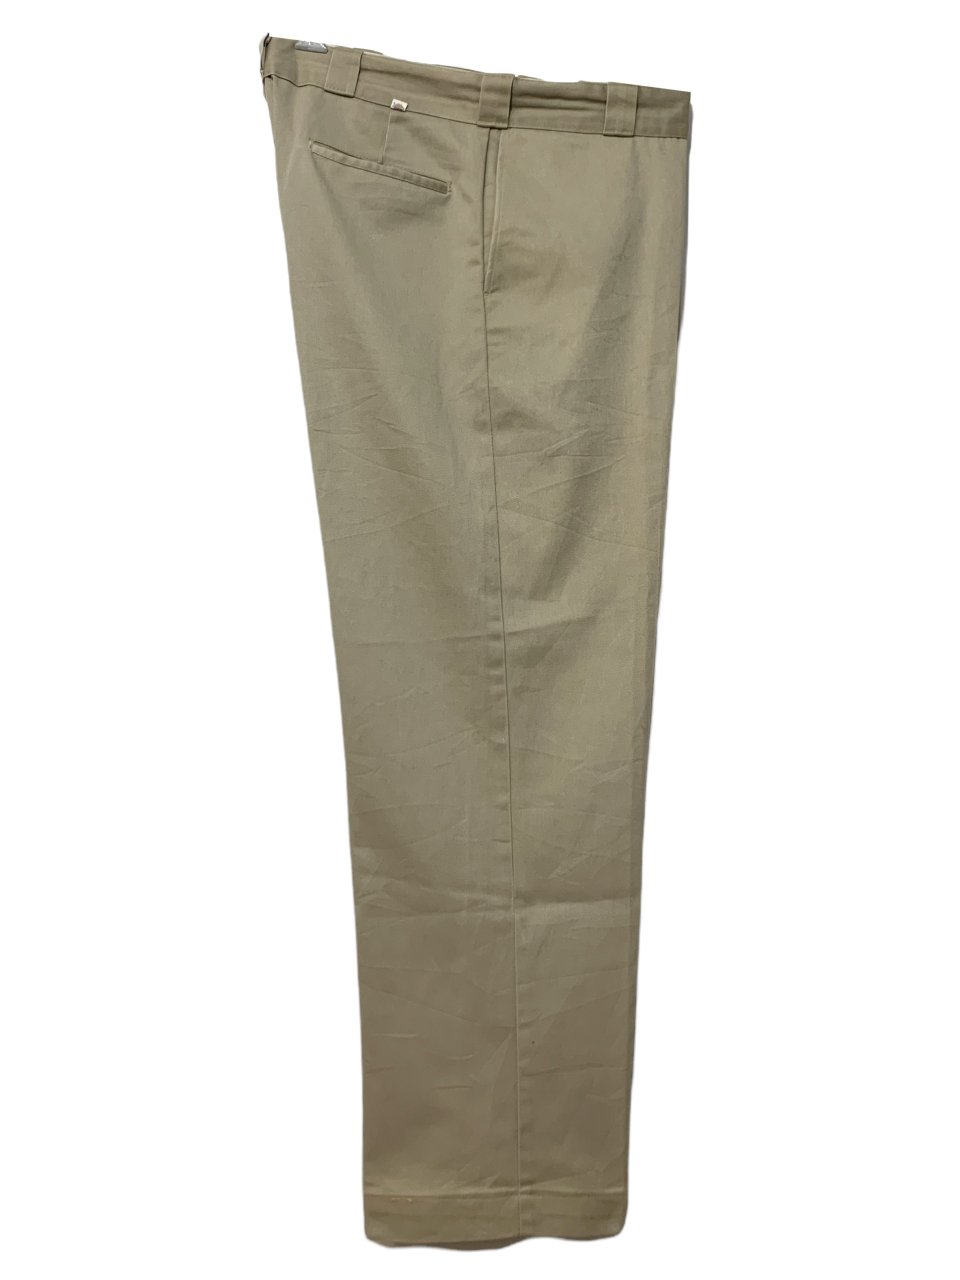 USA製 80s Dickies 874 Work Pants カーキ W39×L28 ディッキーズ ワークパンツ ベージュ アメリカ製 Made  in USA 古着 - NEWJOKE ONLINE STORE